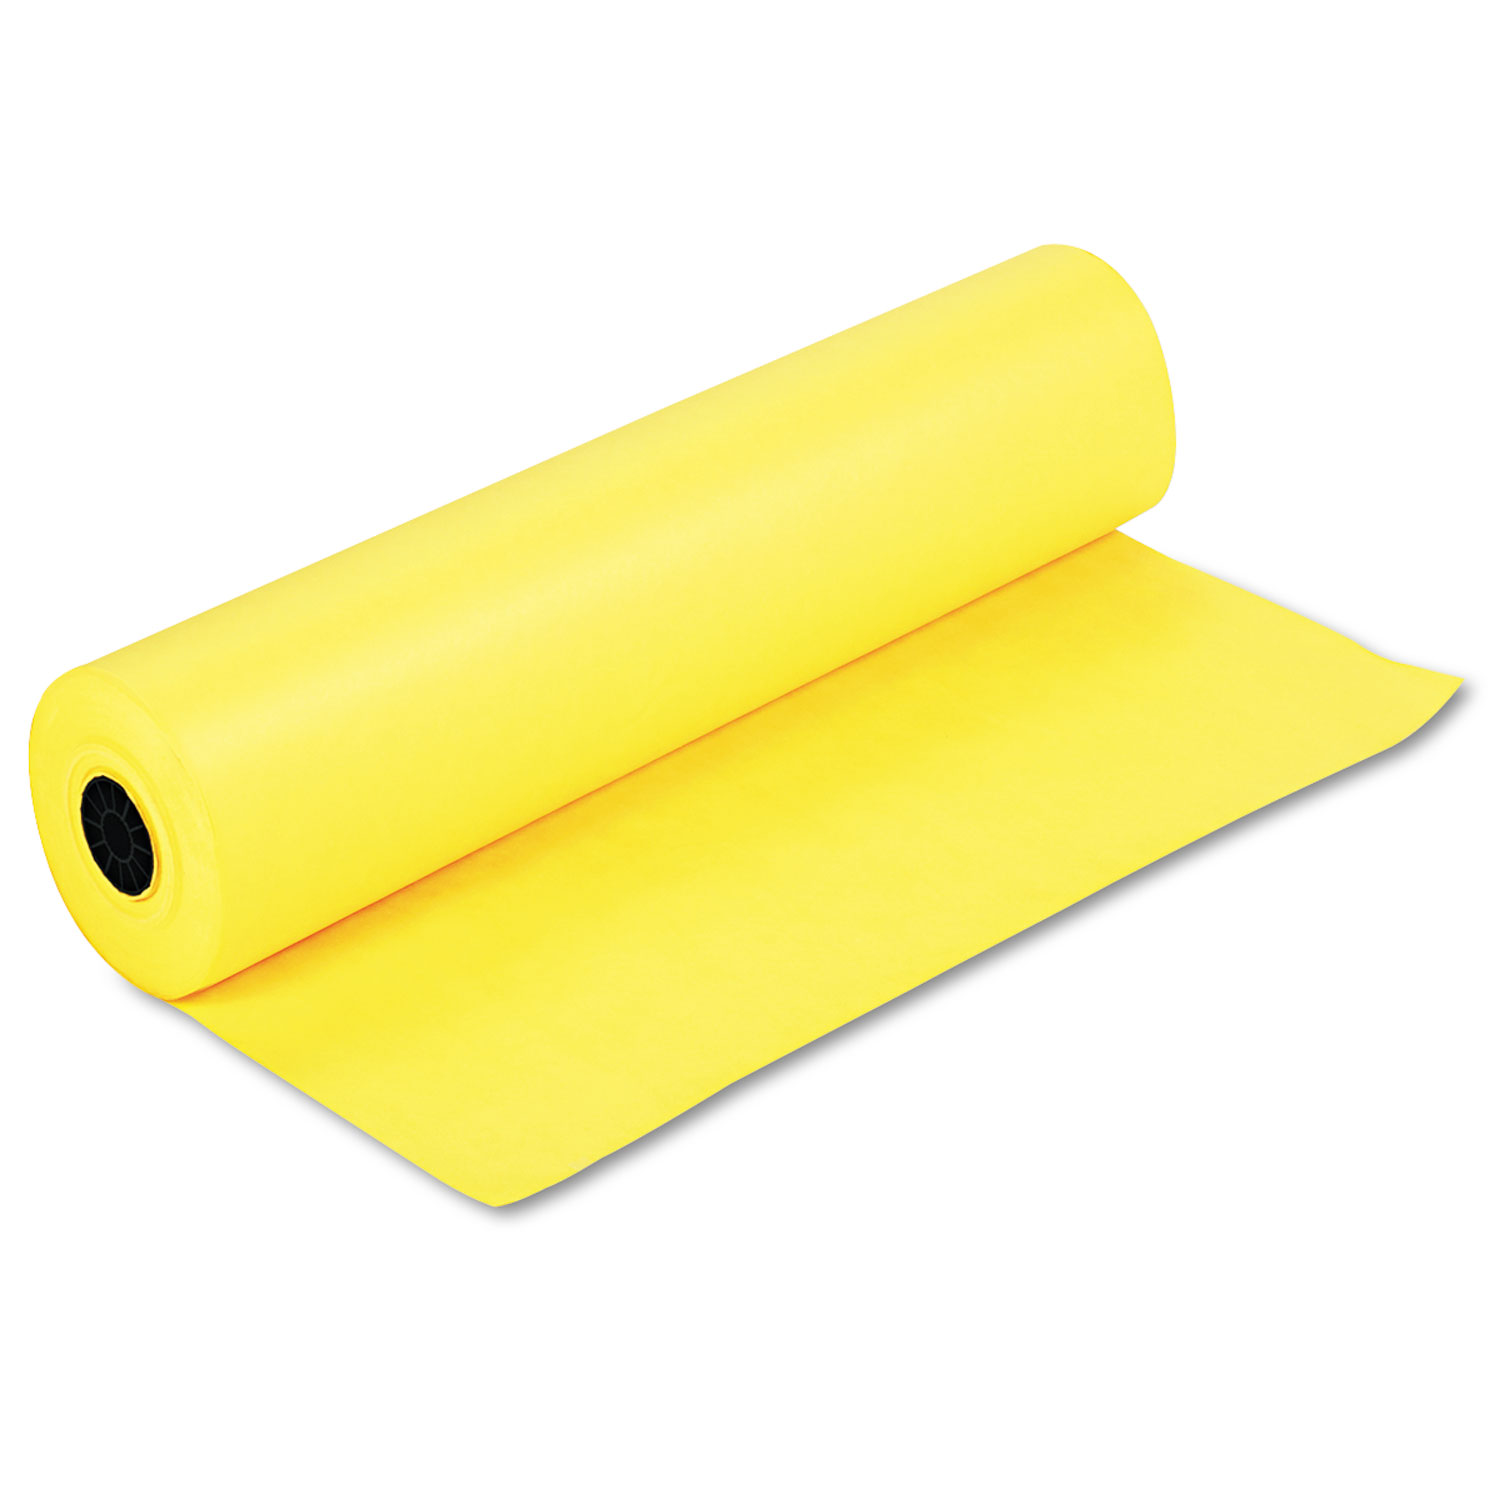  Pacon 67081 Spectra ArtKraft Duo-Finish Paper, 48lb, 36 x 1000ft, Canary Yellow (PAC67081) 